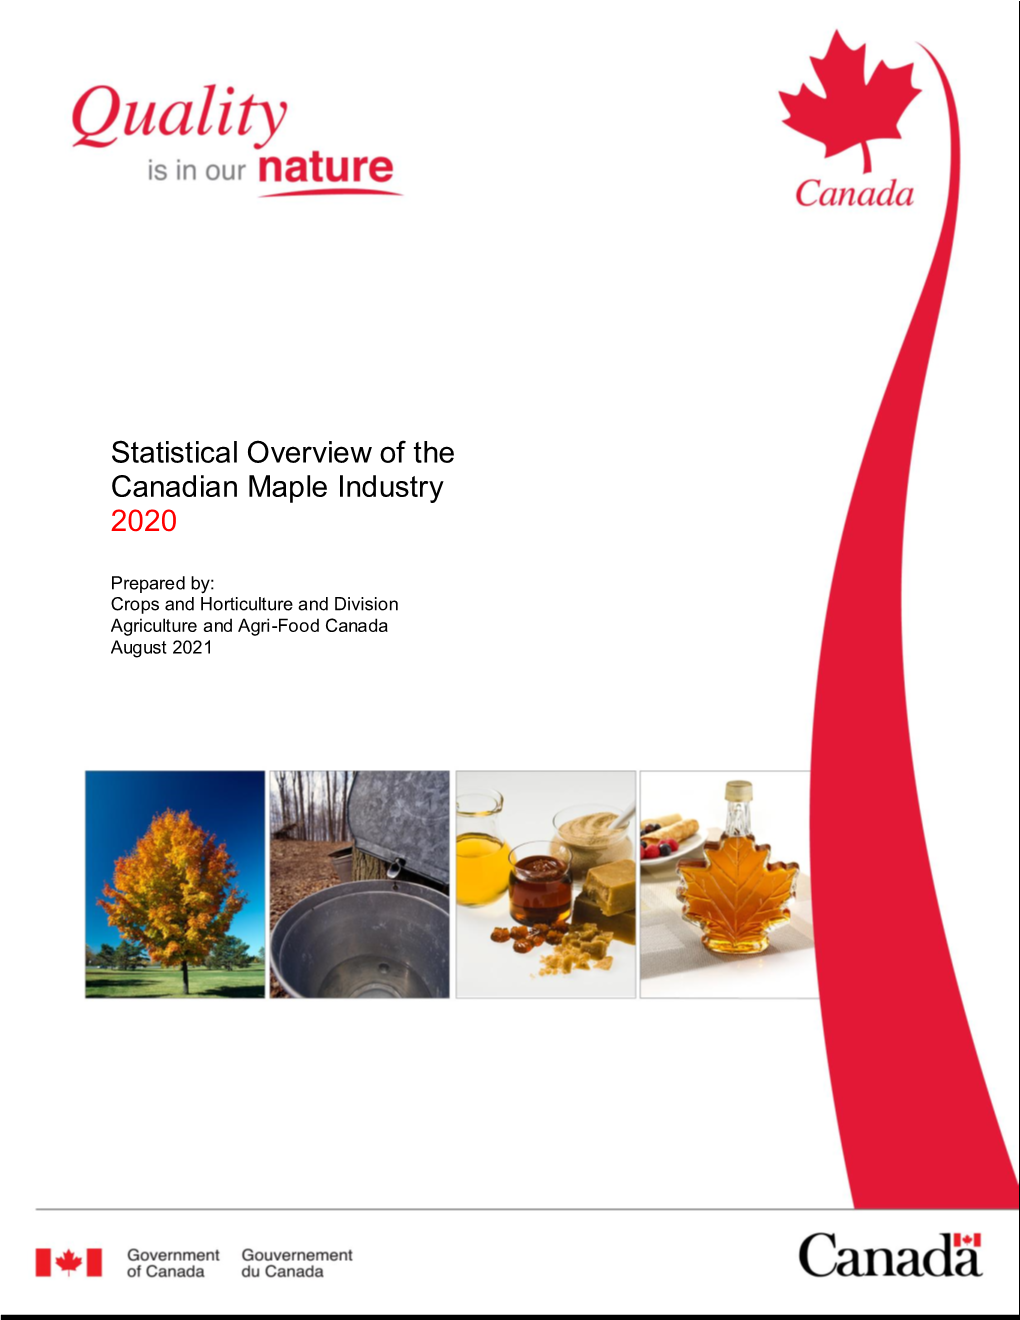 Statistical Overview of the Canadian Maple Industry 2020